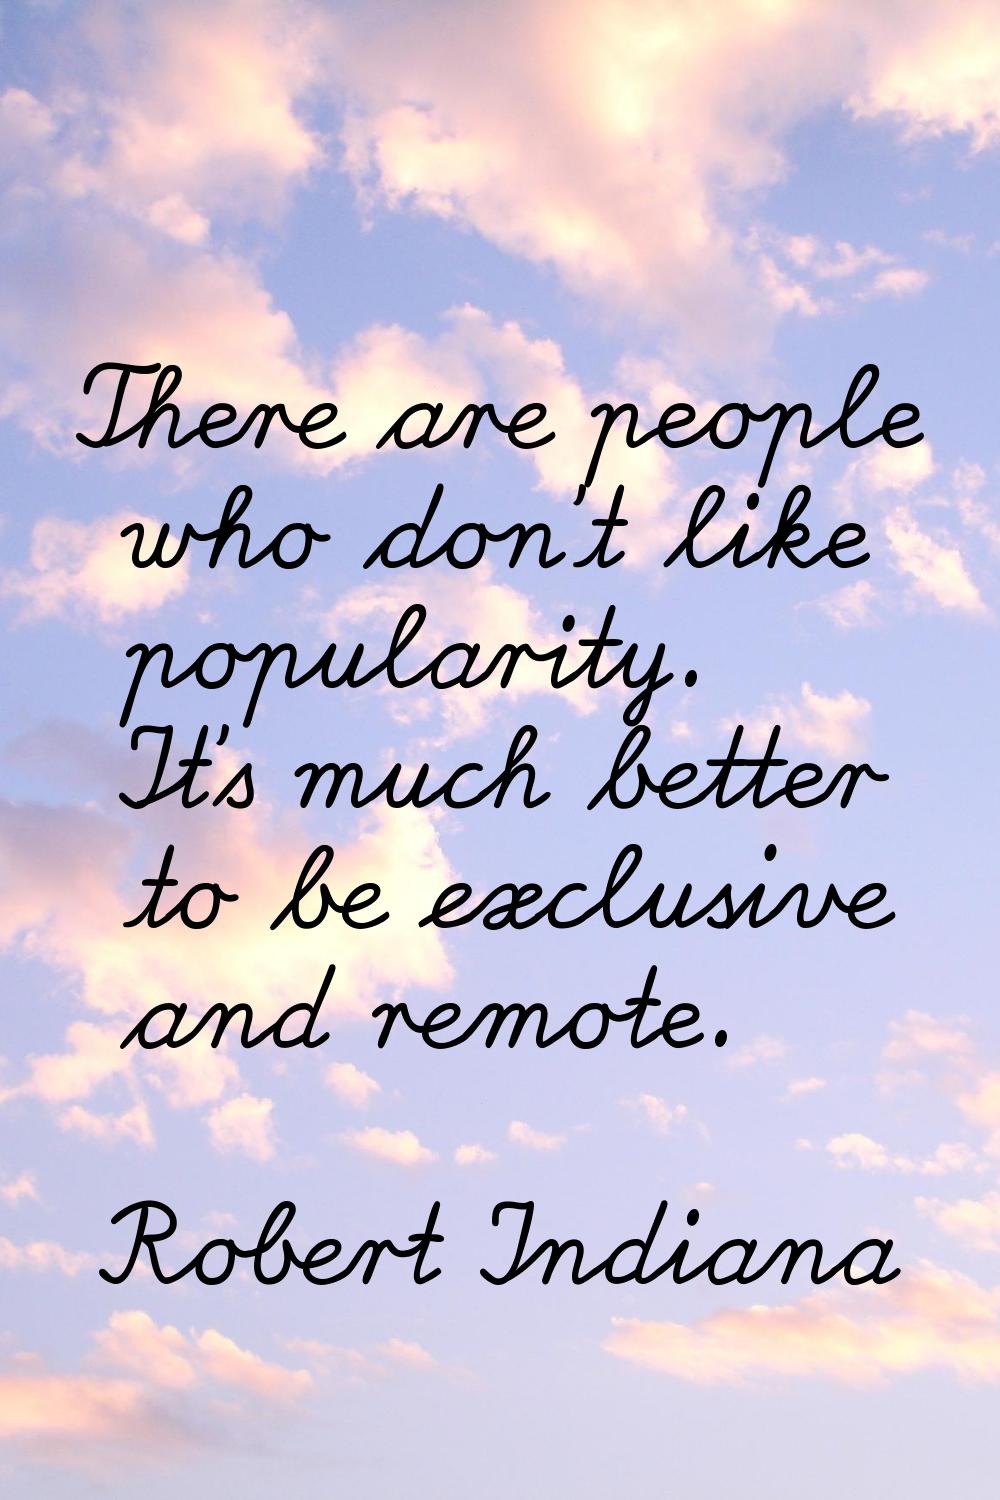 There are people who don't like popularity. It's much better to be exclusive and remote.